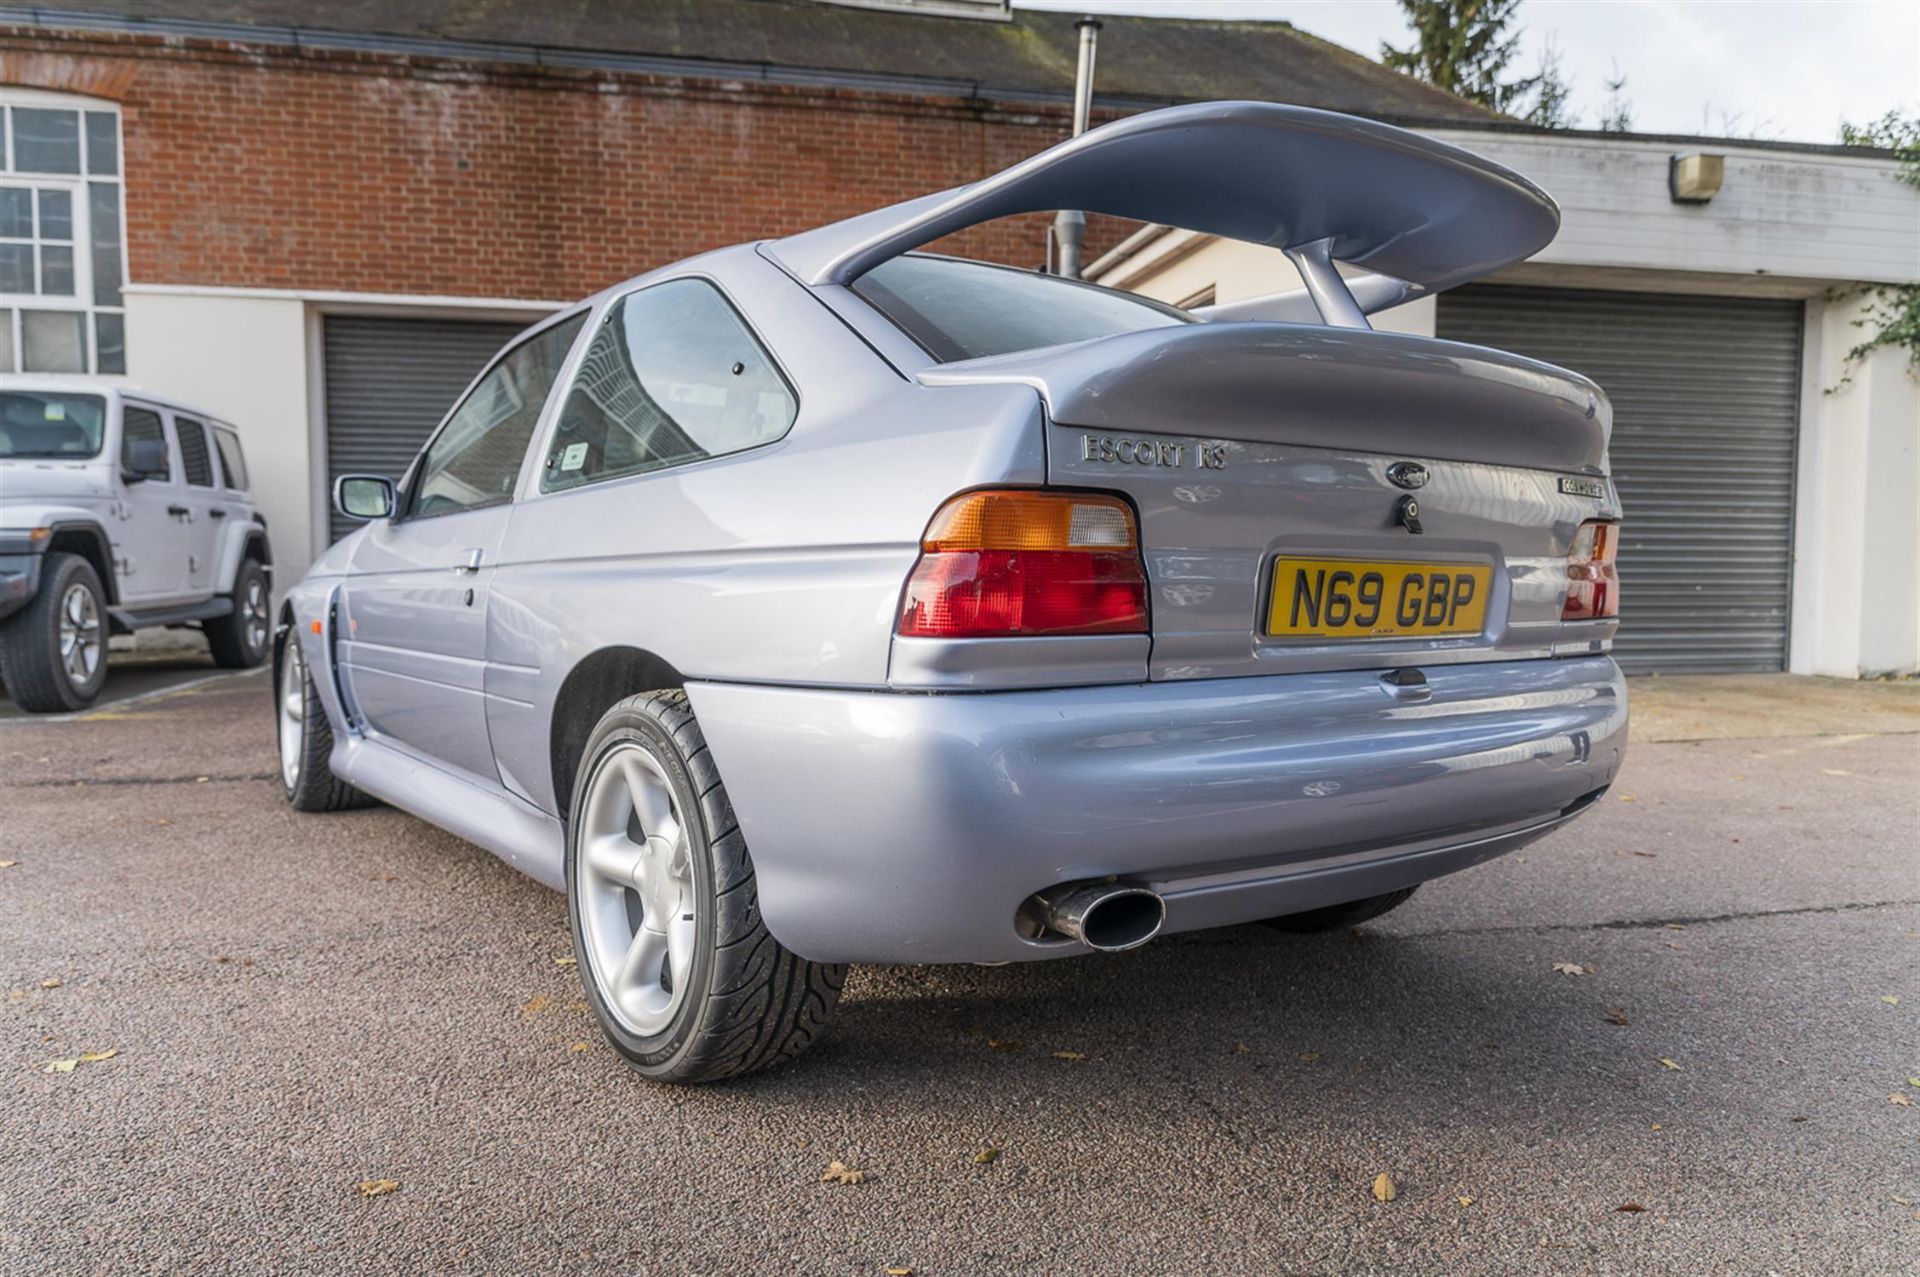 1996 Ford Escort RS Cosworth Lux - Image 3 of 10